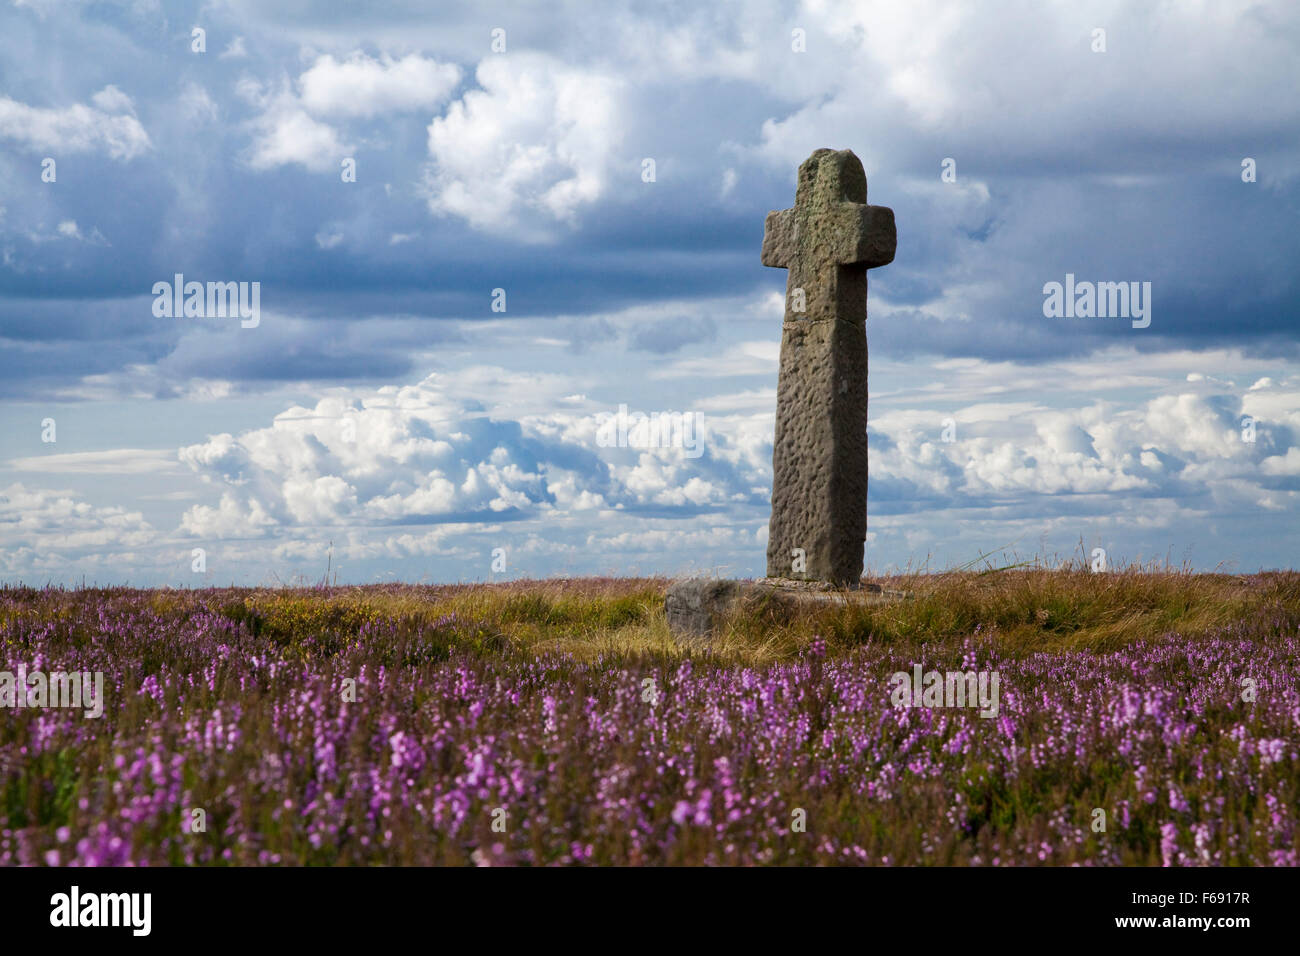 Vieux ralph cross westerdale moor North York Moors national park North Yorkshire angleterre uk Banque D'Images